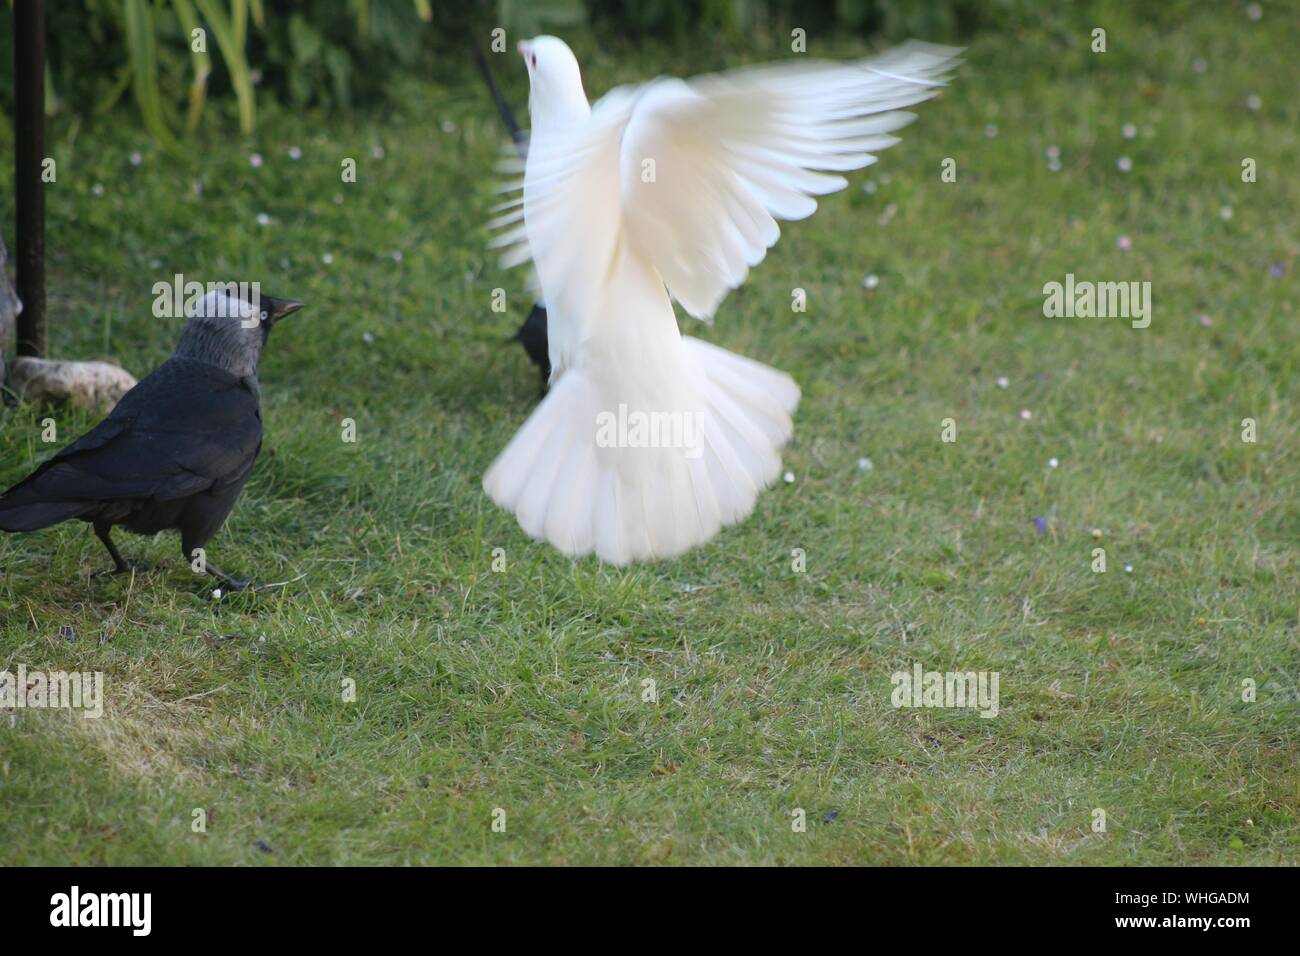 White Pigeon Mid Air Against Green Lawn Stock Photo